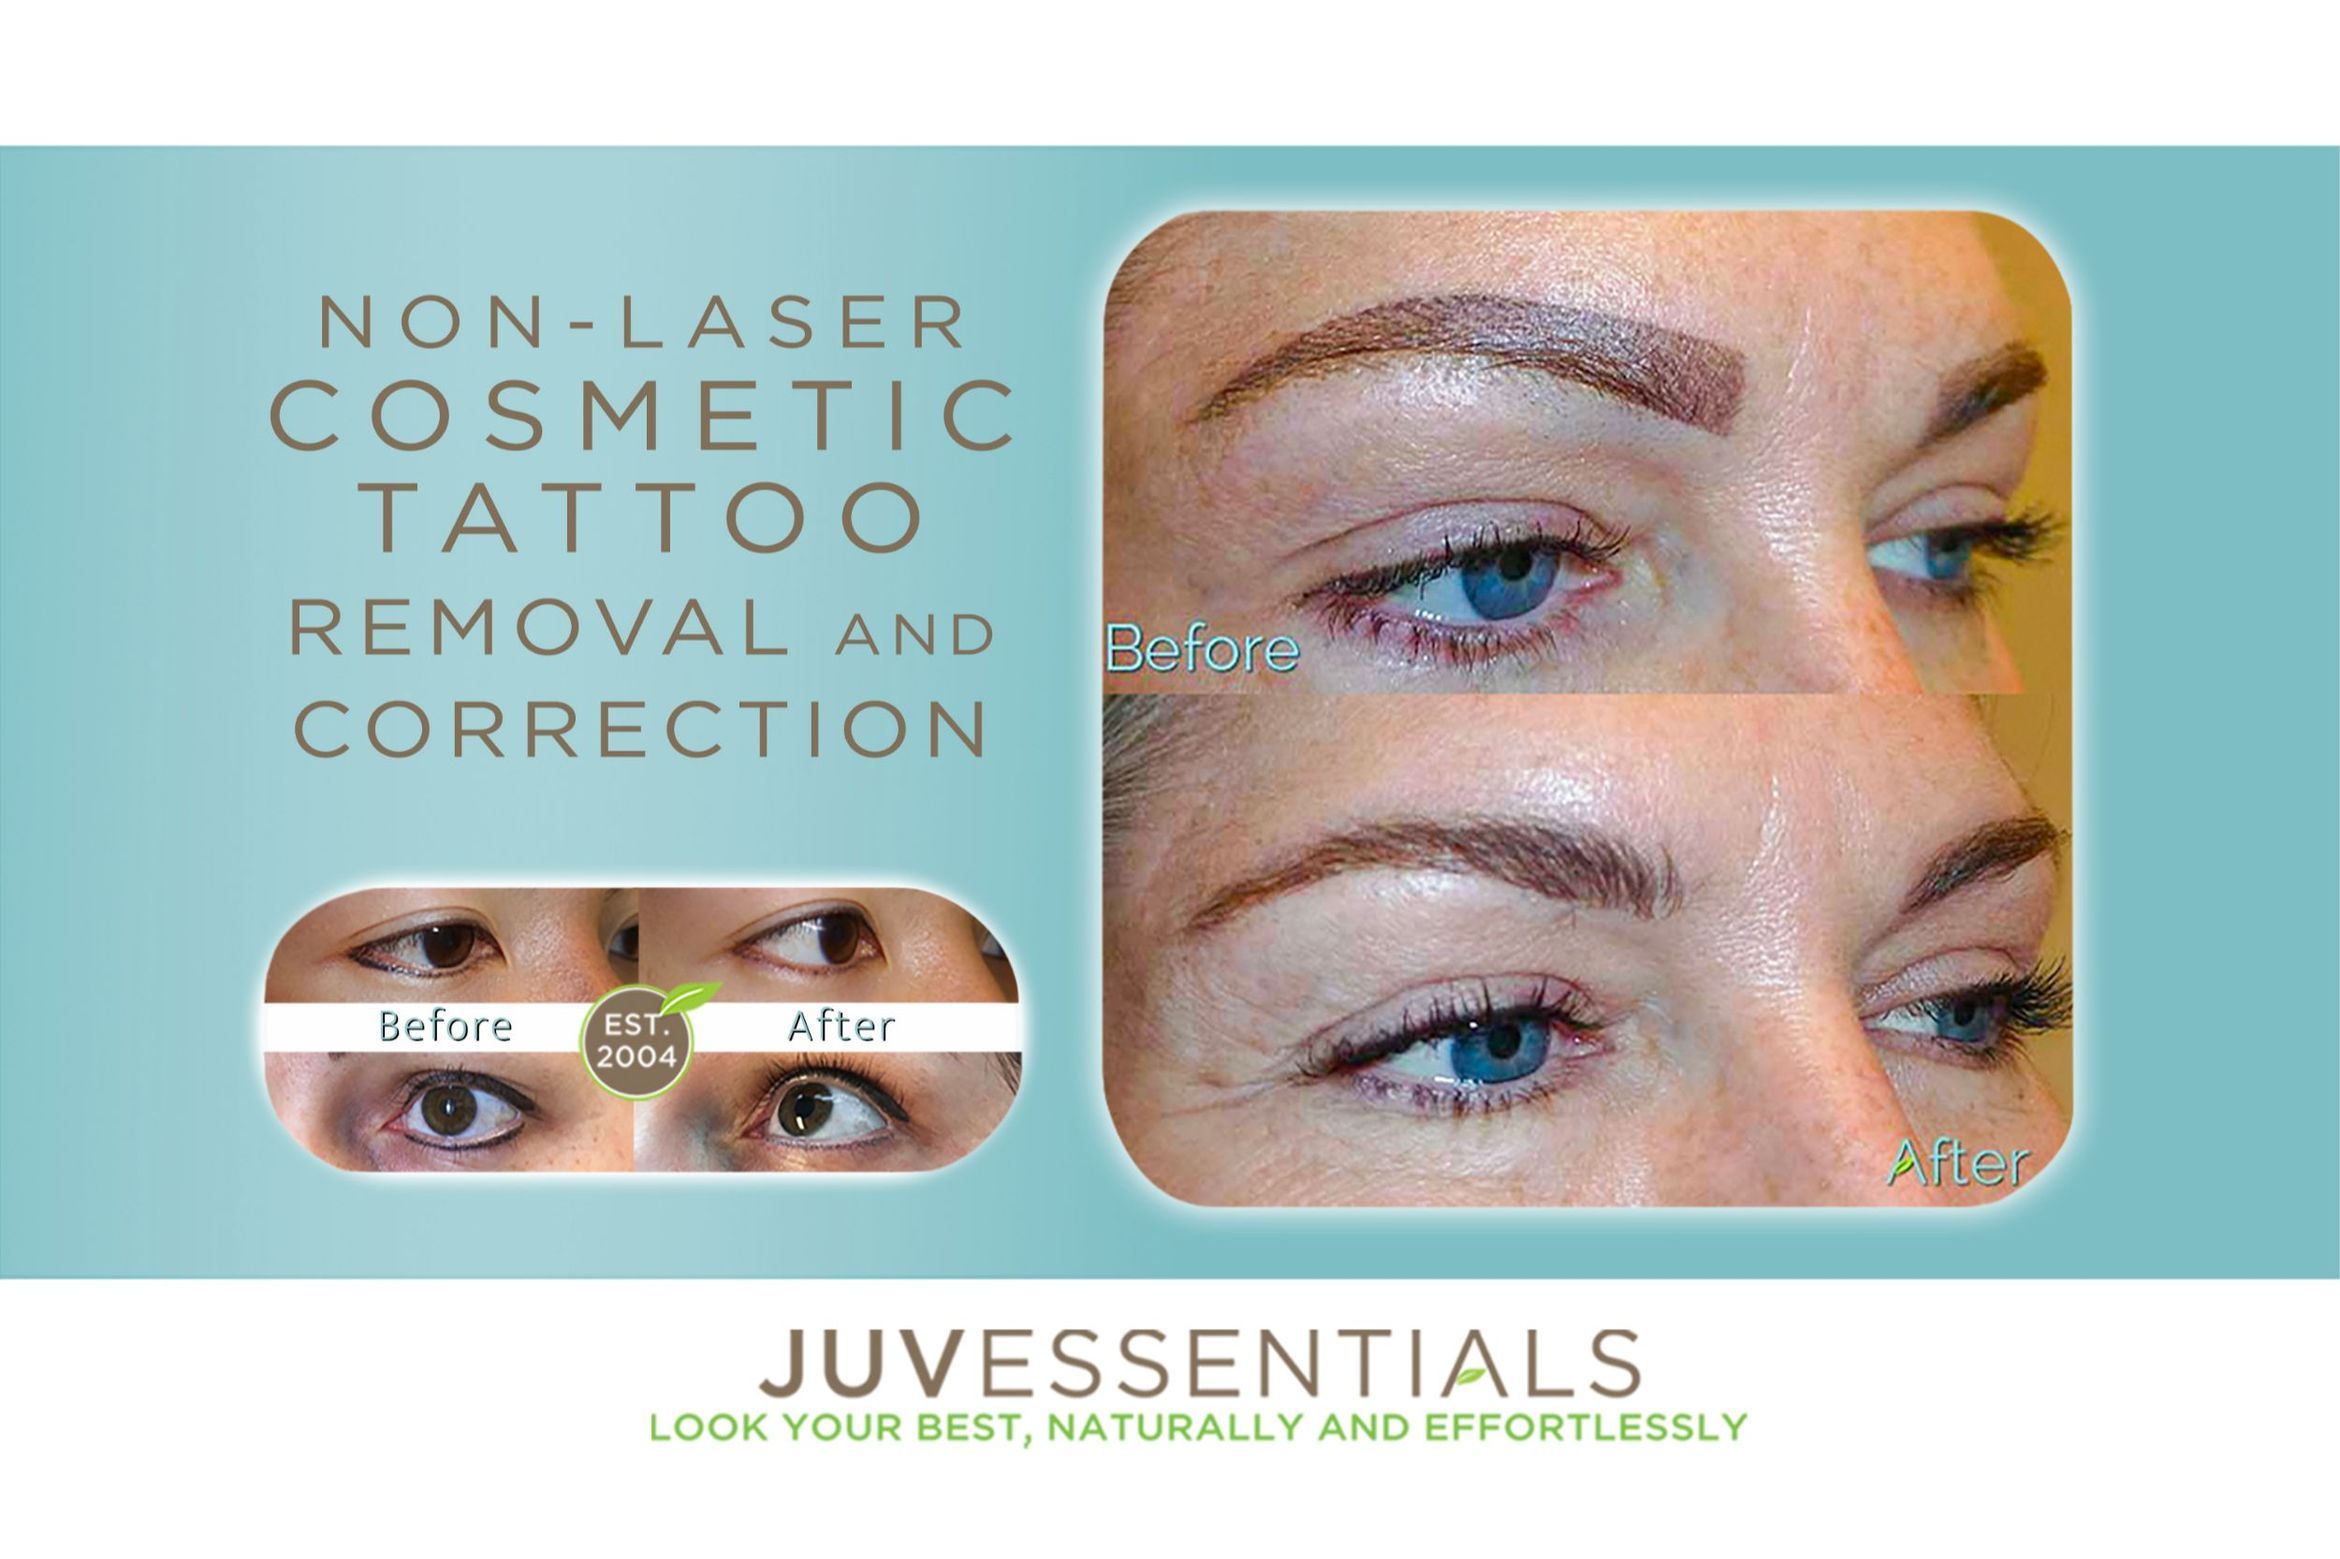 Affordable NonLaser Tattoo Makeup Removal SF Bay Area  Deia Microblading  Services Bay Area